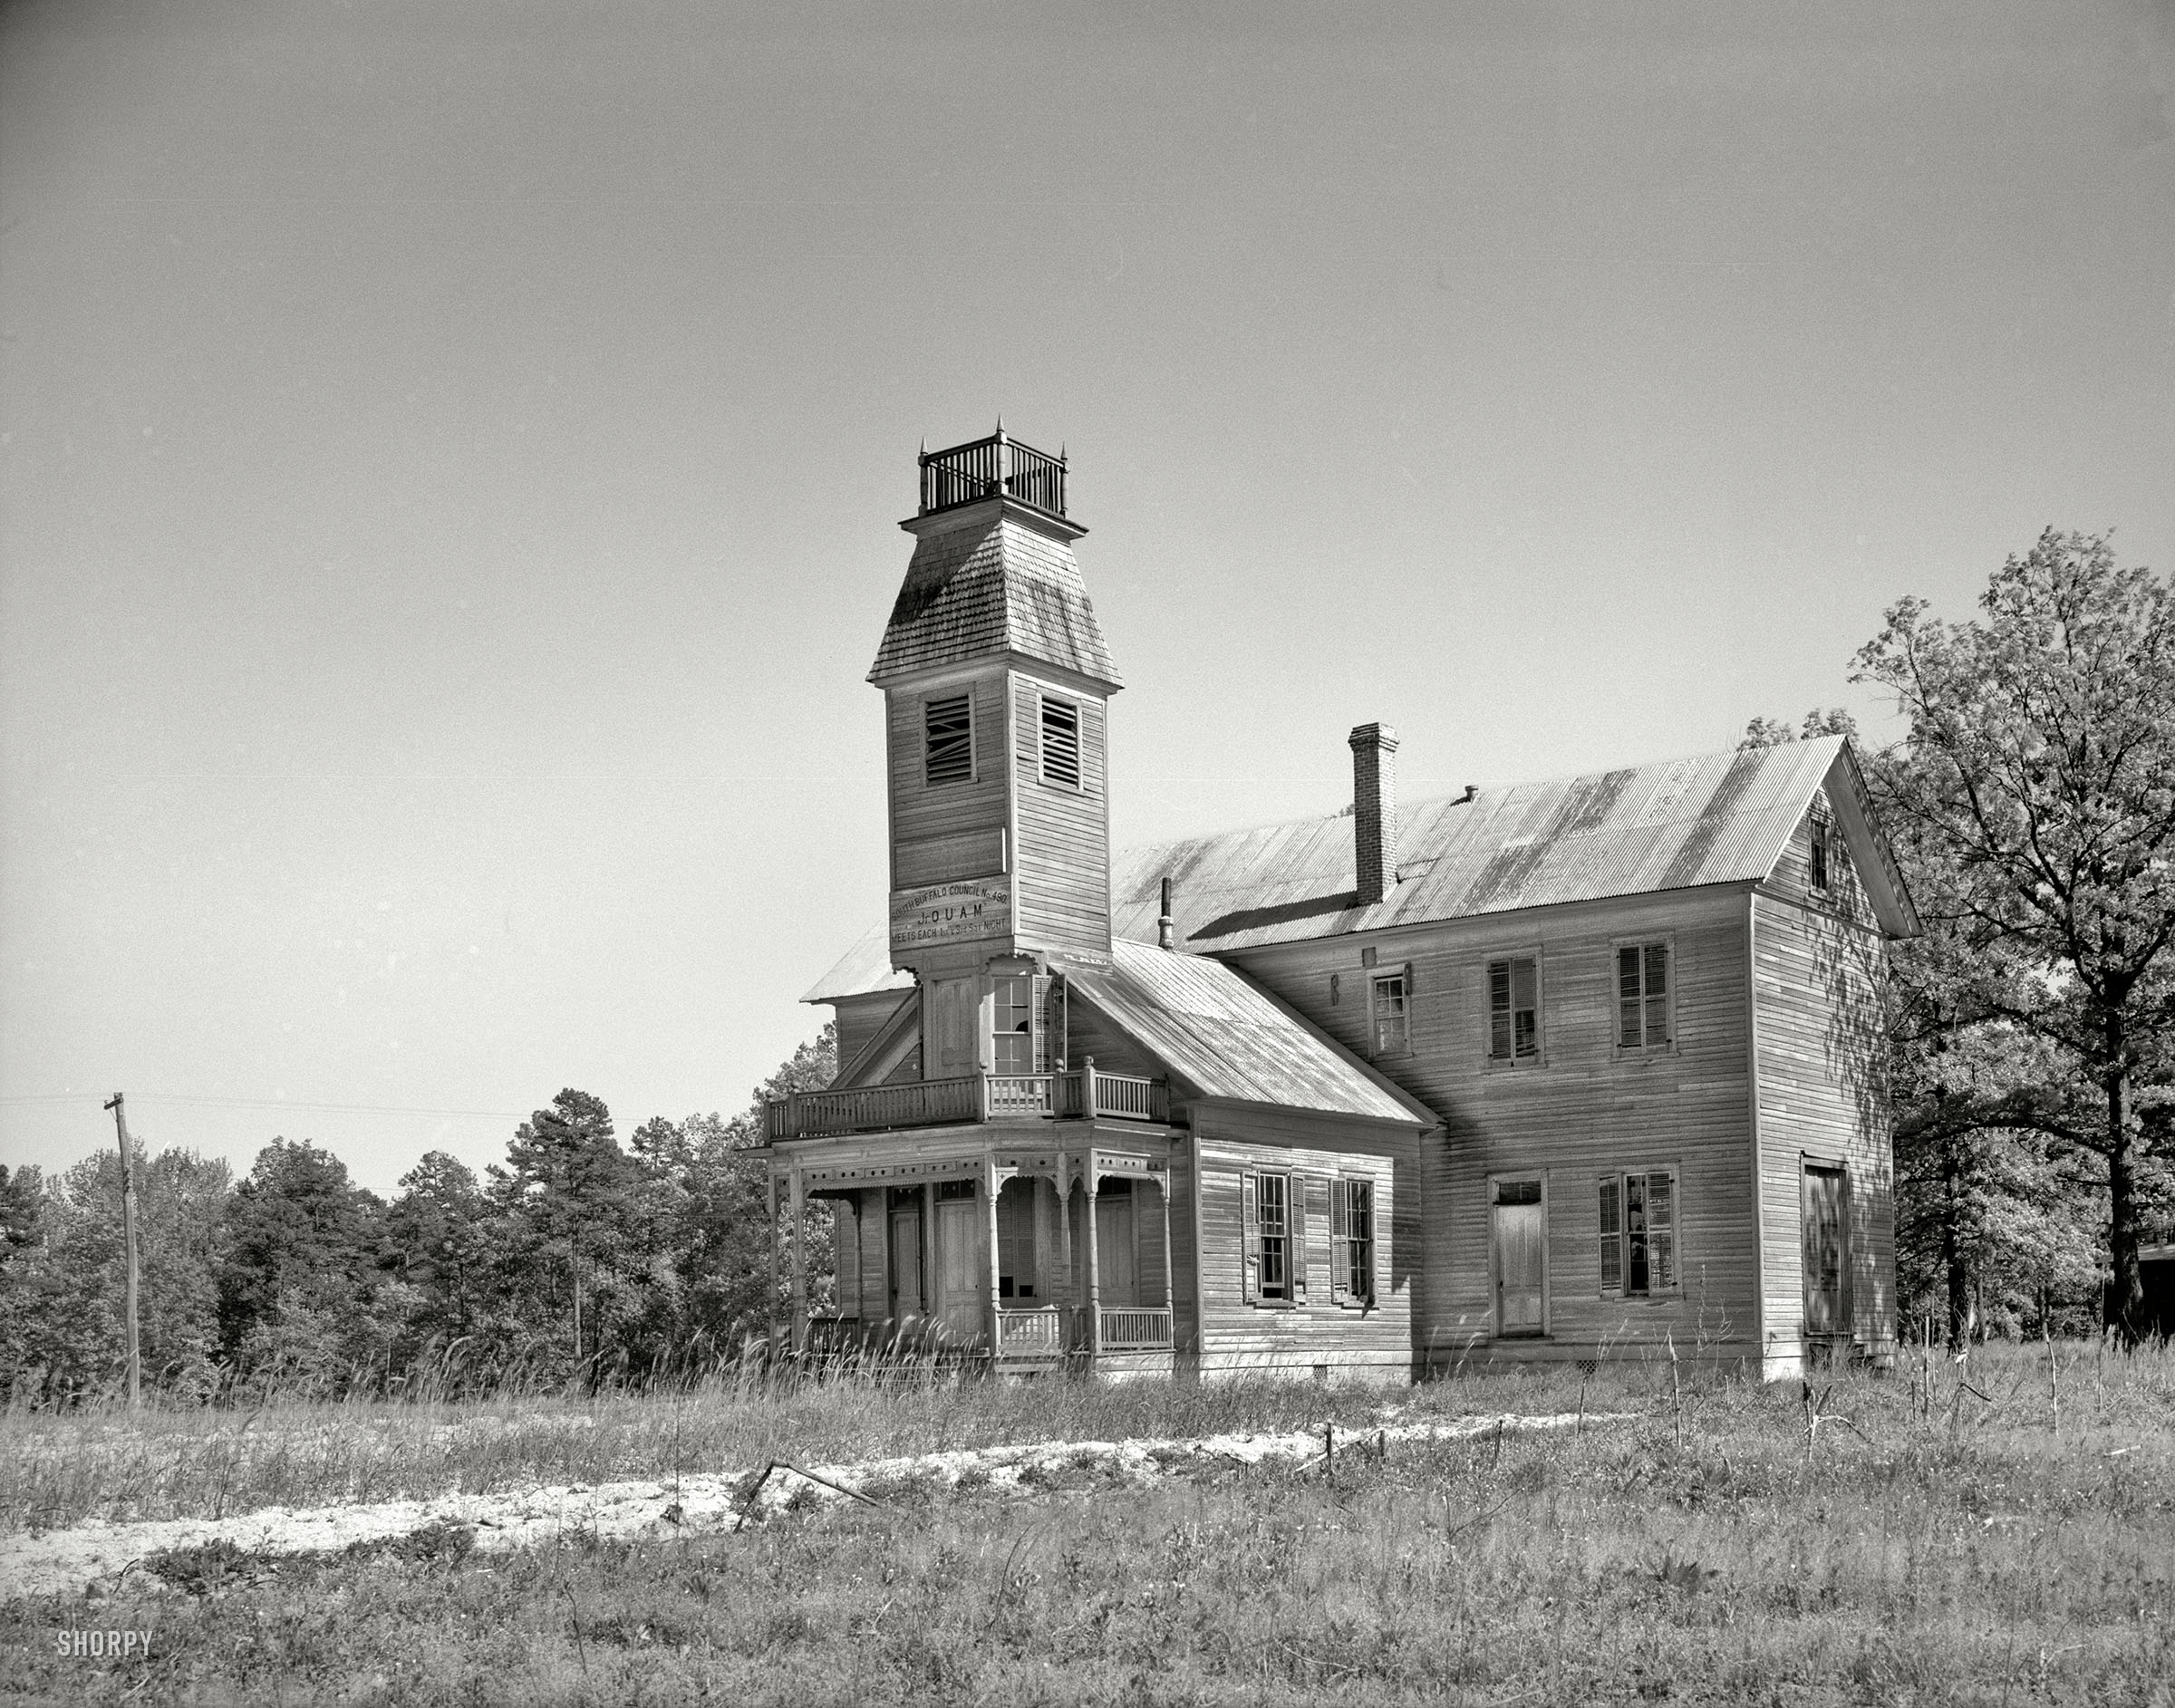 April 1938. "Lodge hall in Guilford County, North Carolina." The Jr. O.U.A.M., or Order of United American Mechanics. Which, by the look of things, no longer "meets each 1st & 3rd Sat night." Photo by John Vachon. View full size.
